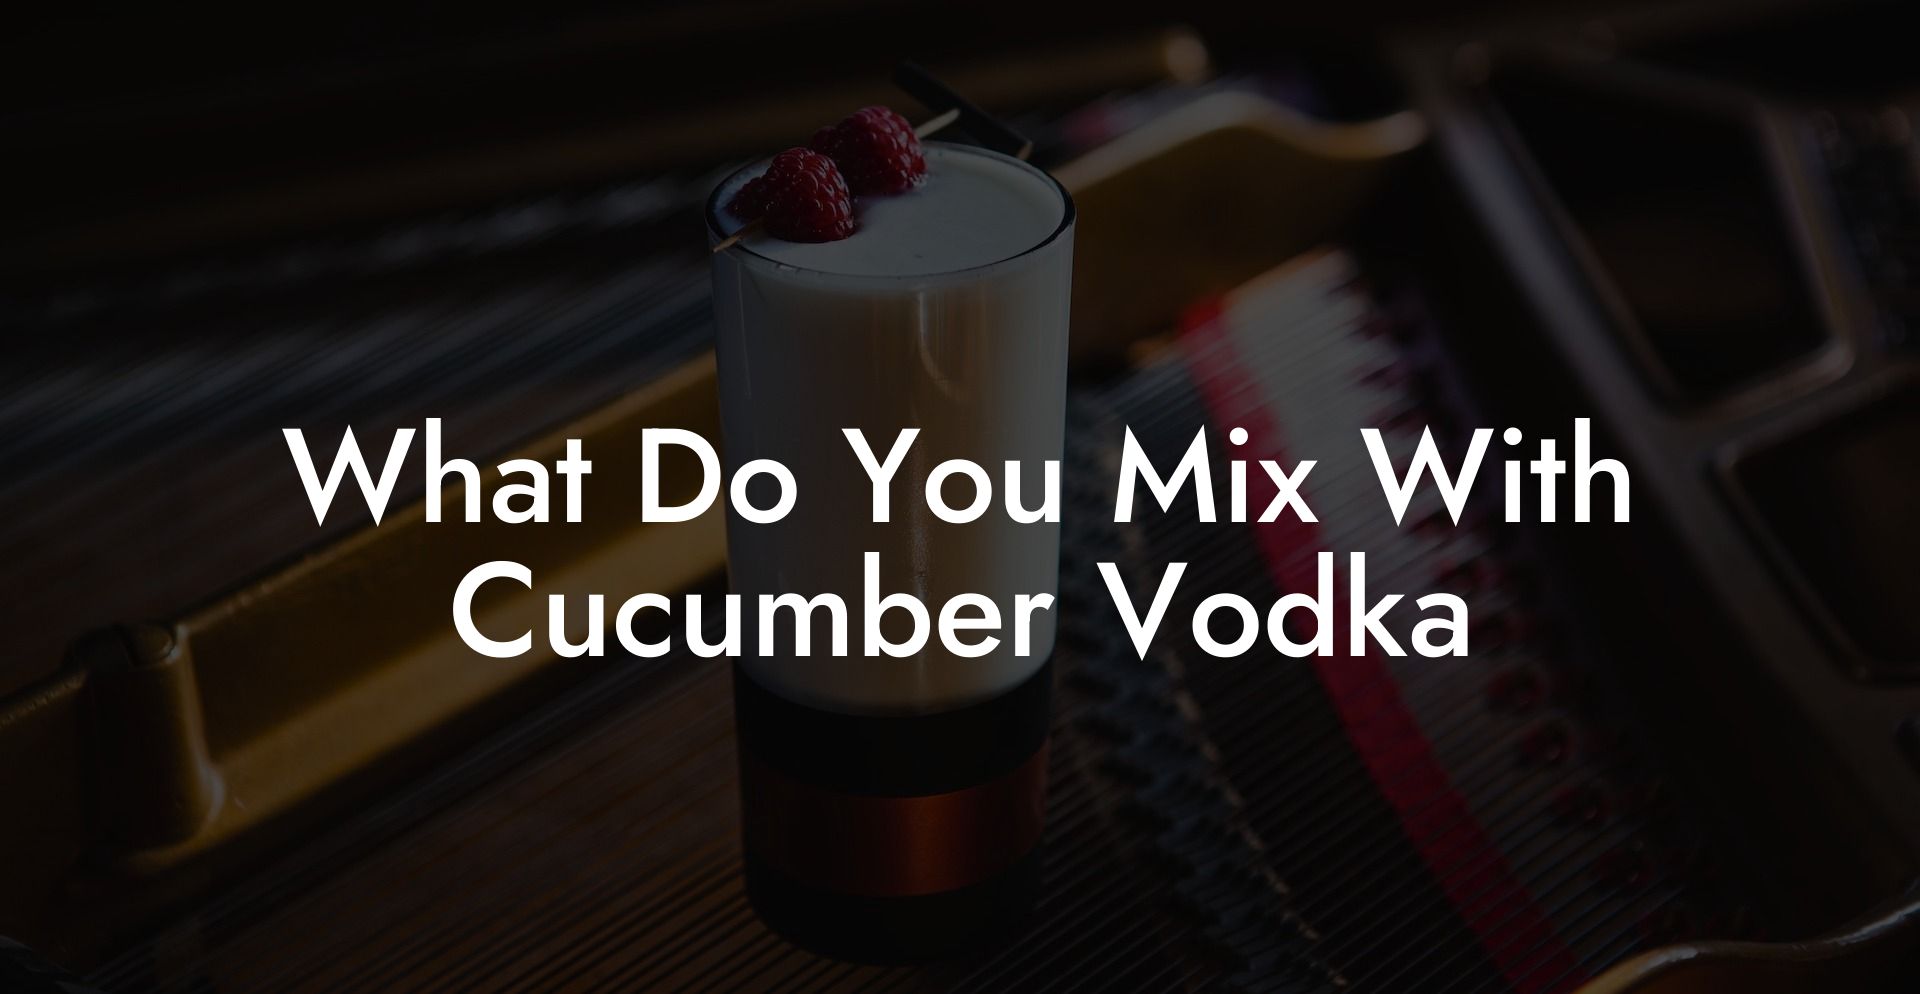 What Do You Mix With Cucumber Vodka